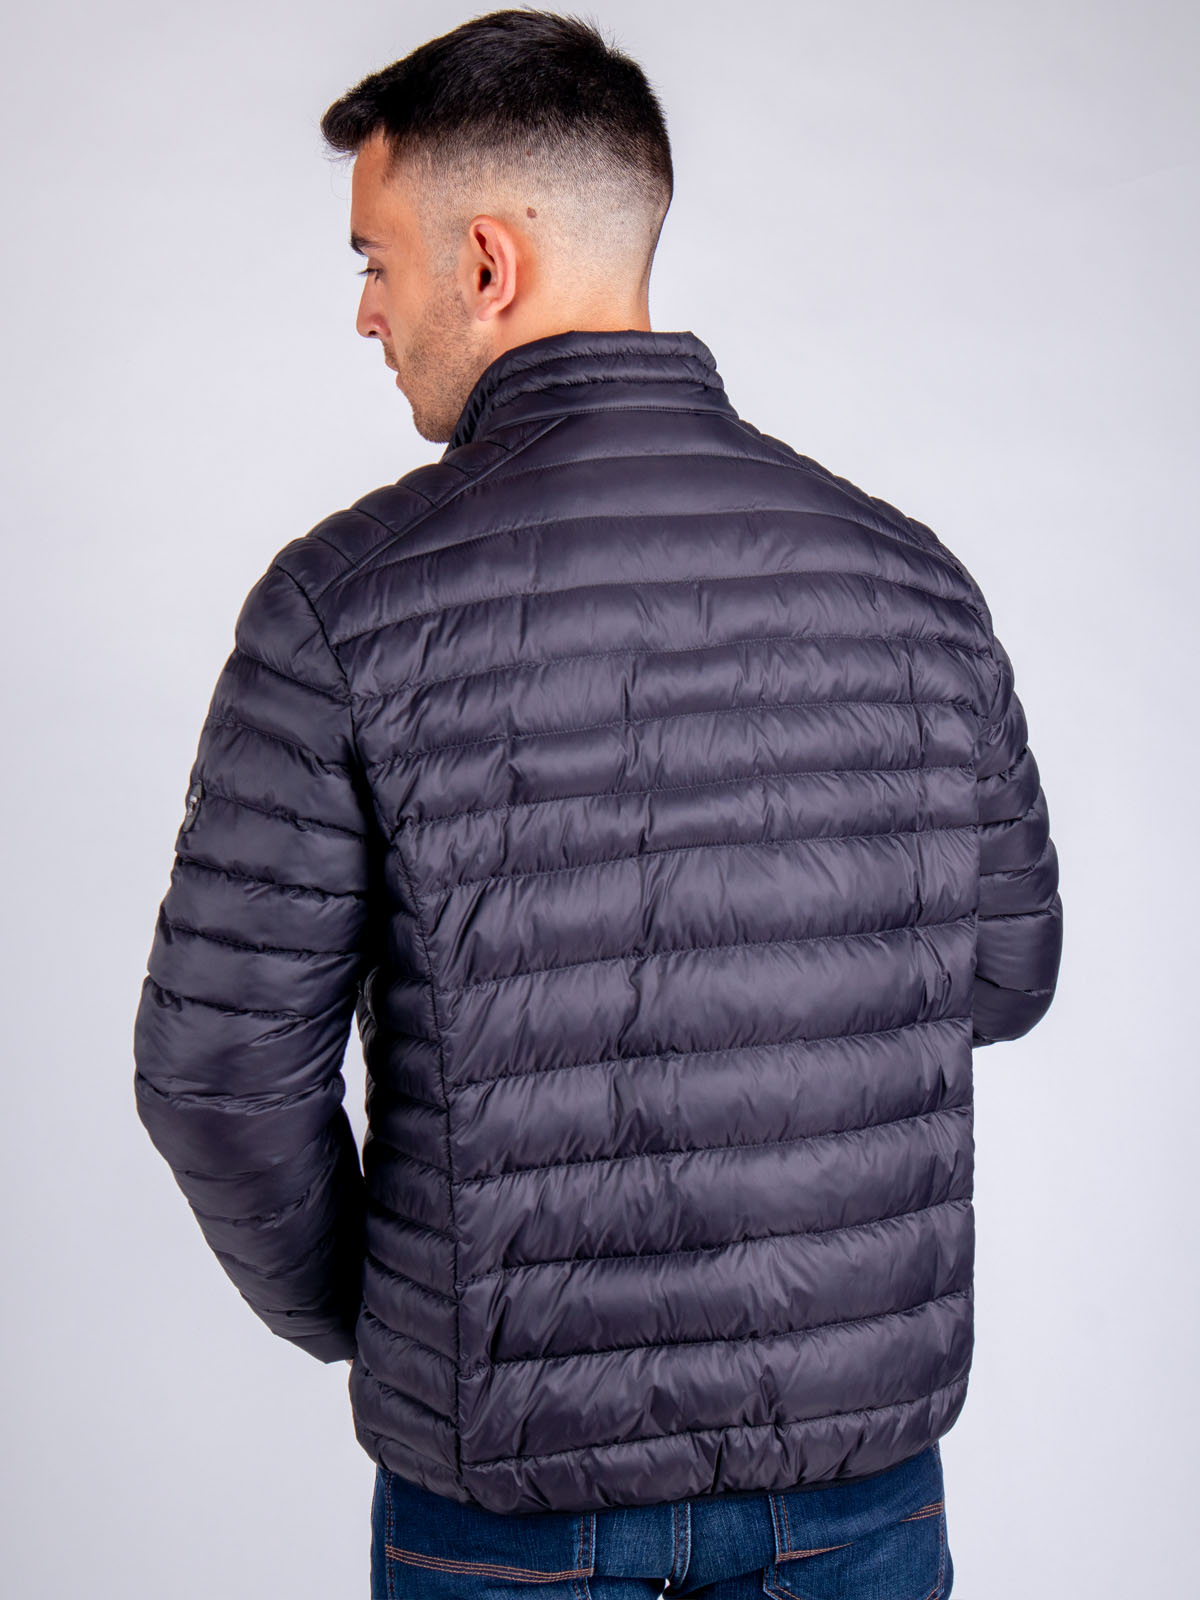 Black short quilted jacket - 65100 € 44.43 img3